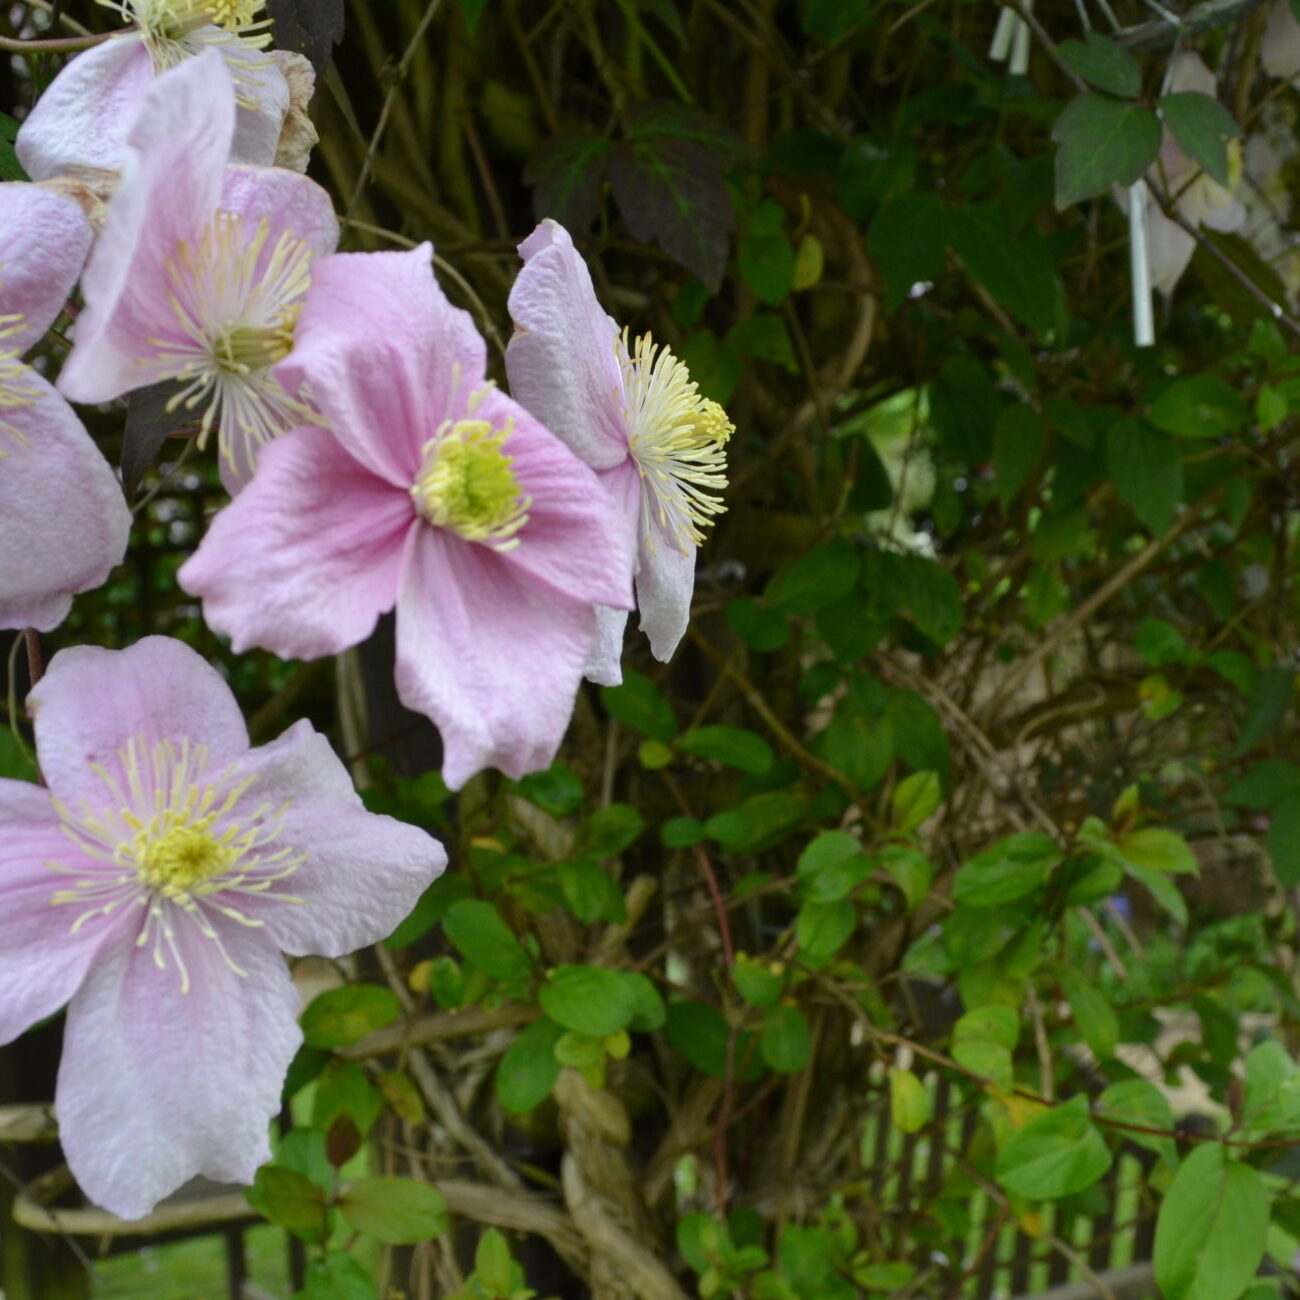 Pergola covered with Clematis